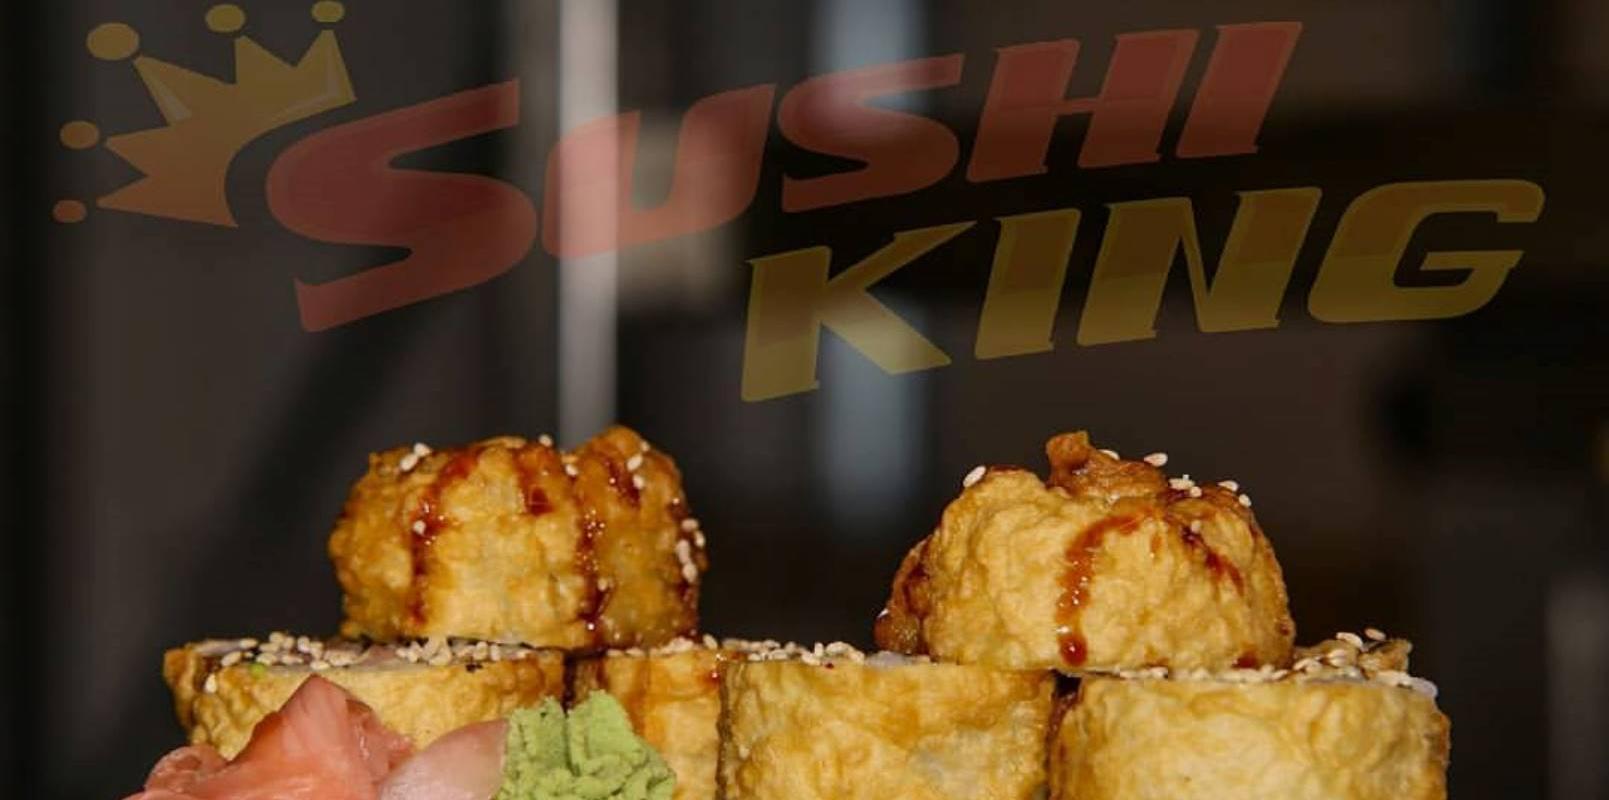 Sushi King is a cozy little restaurant in the centre of Narva. We offer Japanese and European food and you can enjoy both maki sushi, sashimi or wok a